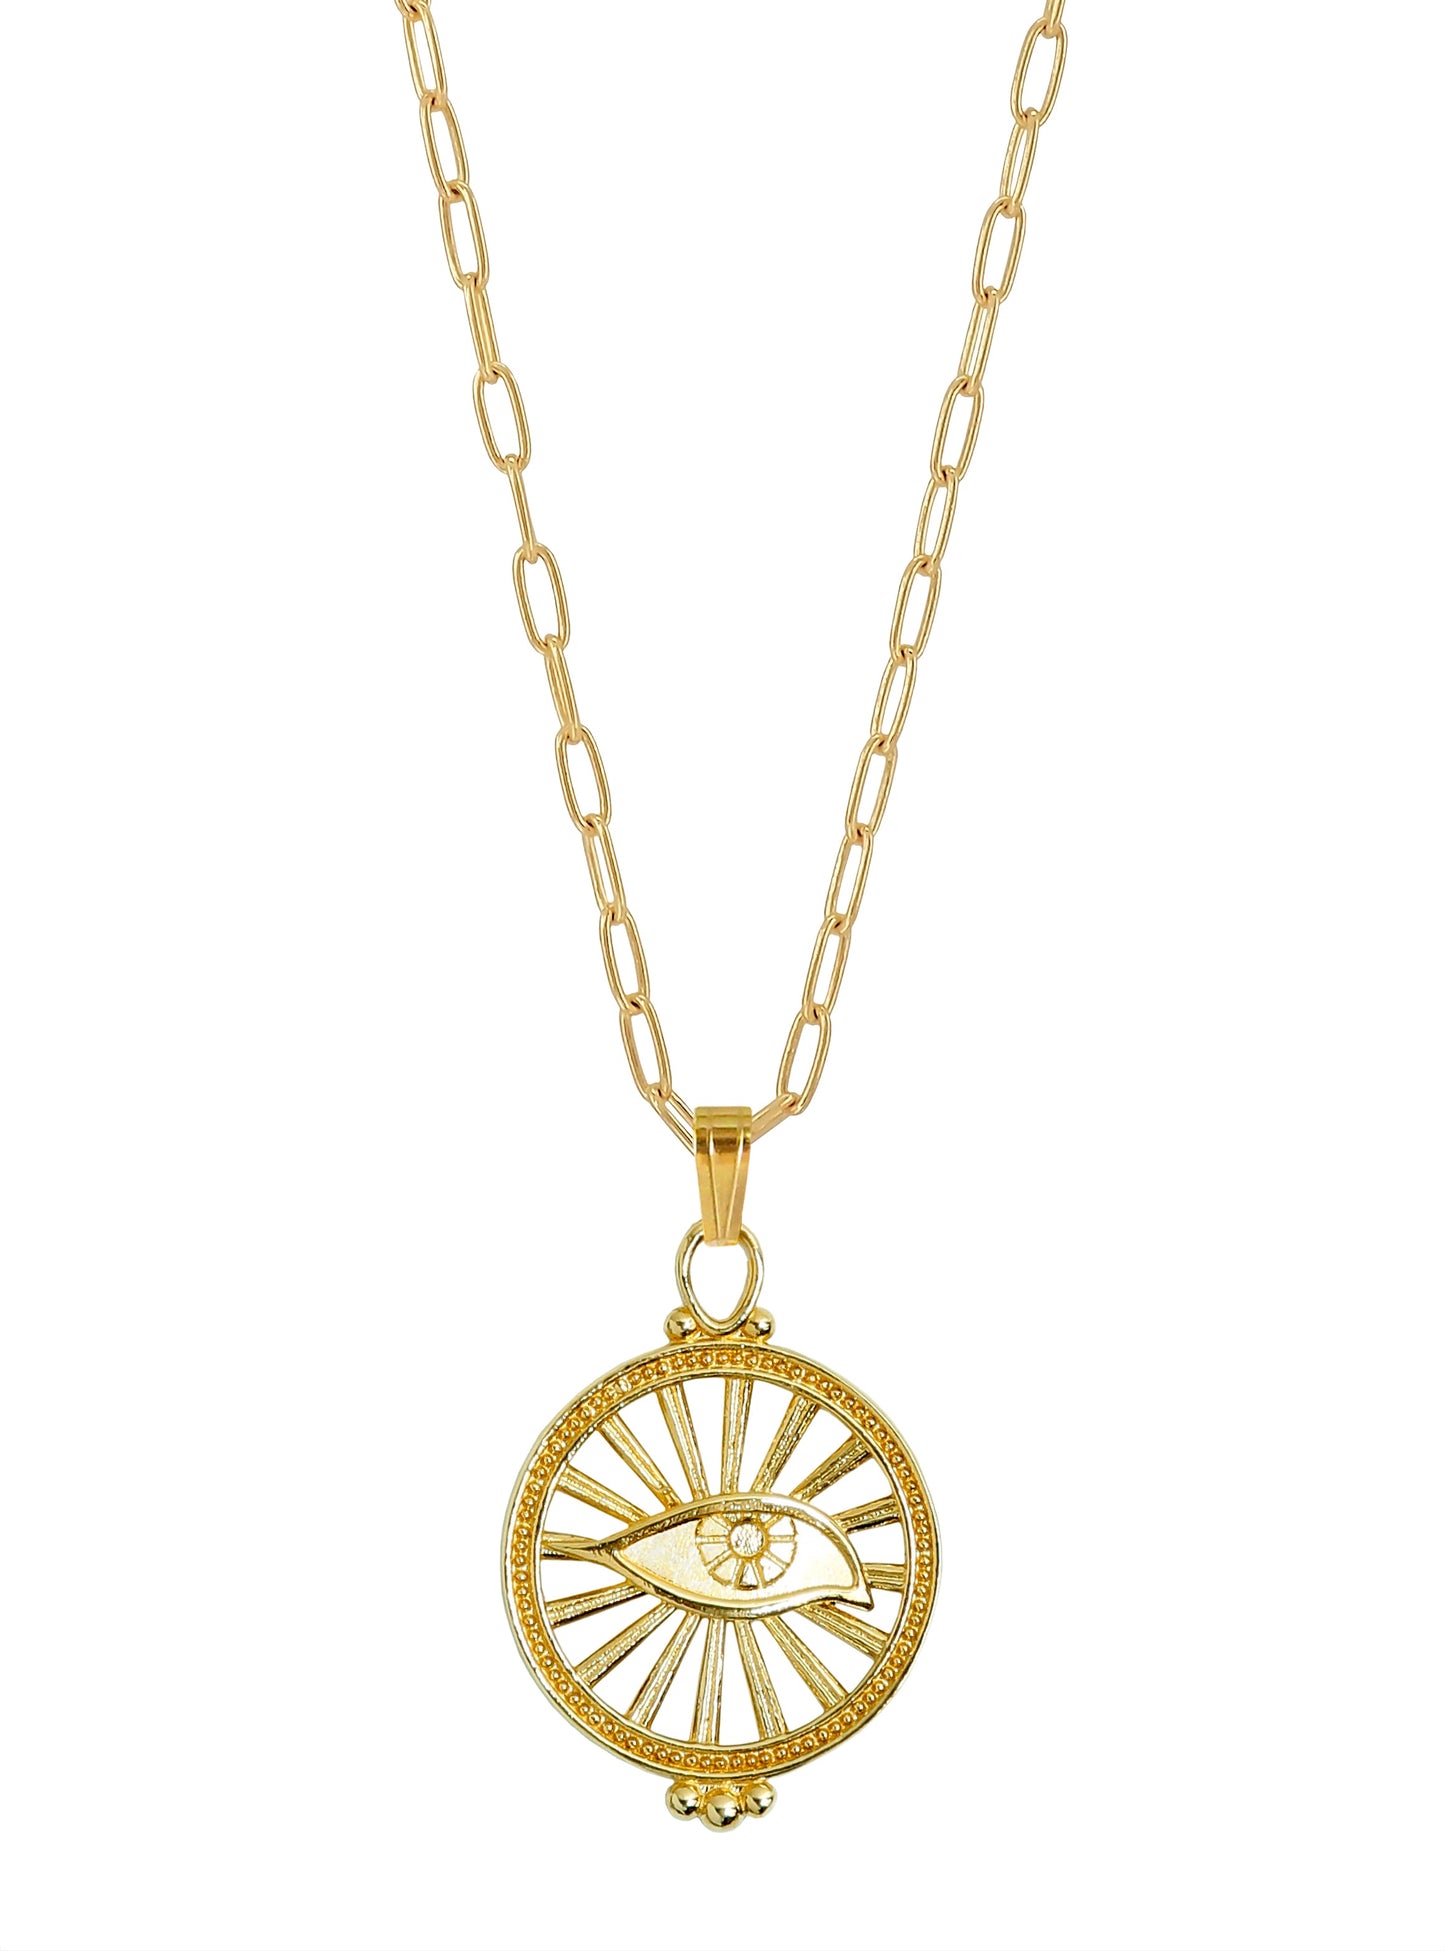 Eye Talisman Necklace, Gold plated Silver, Gender Neutral